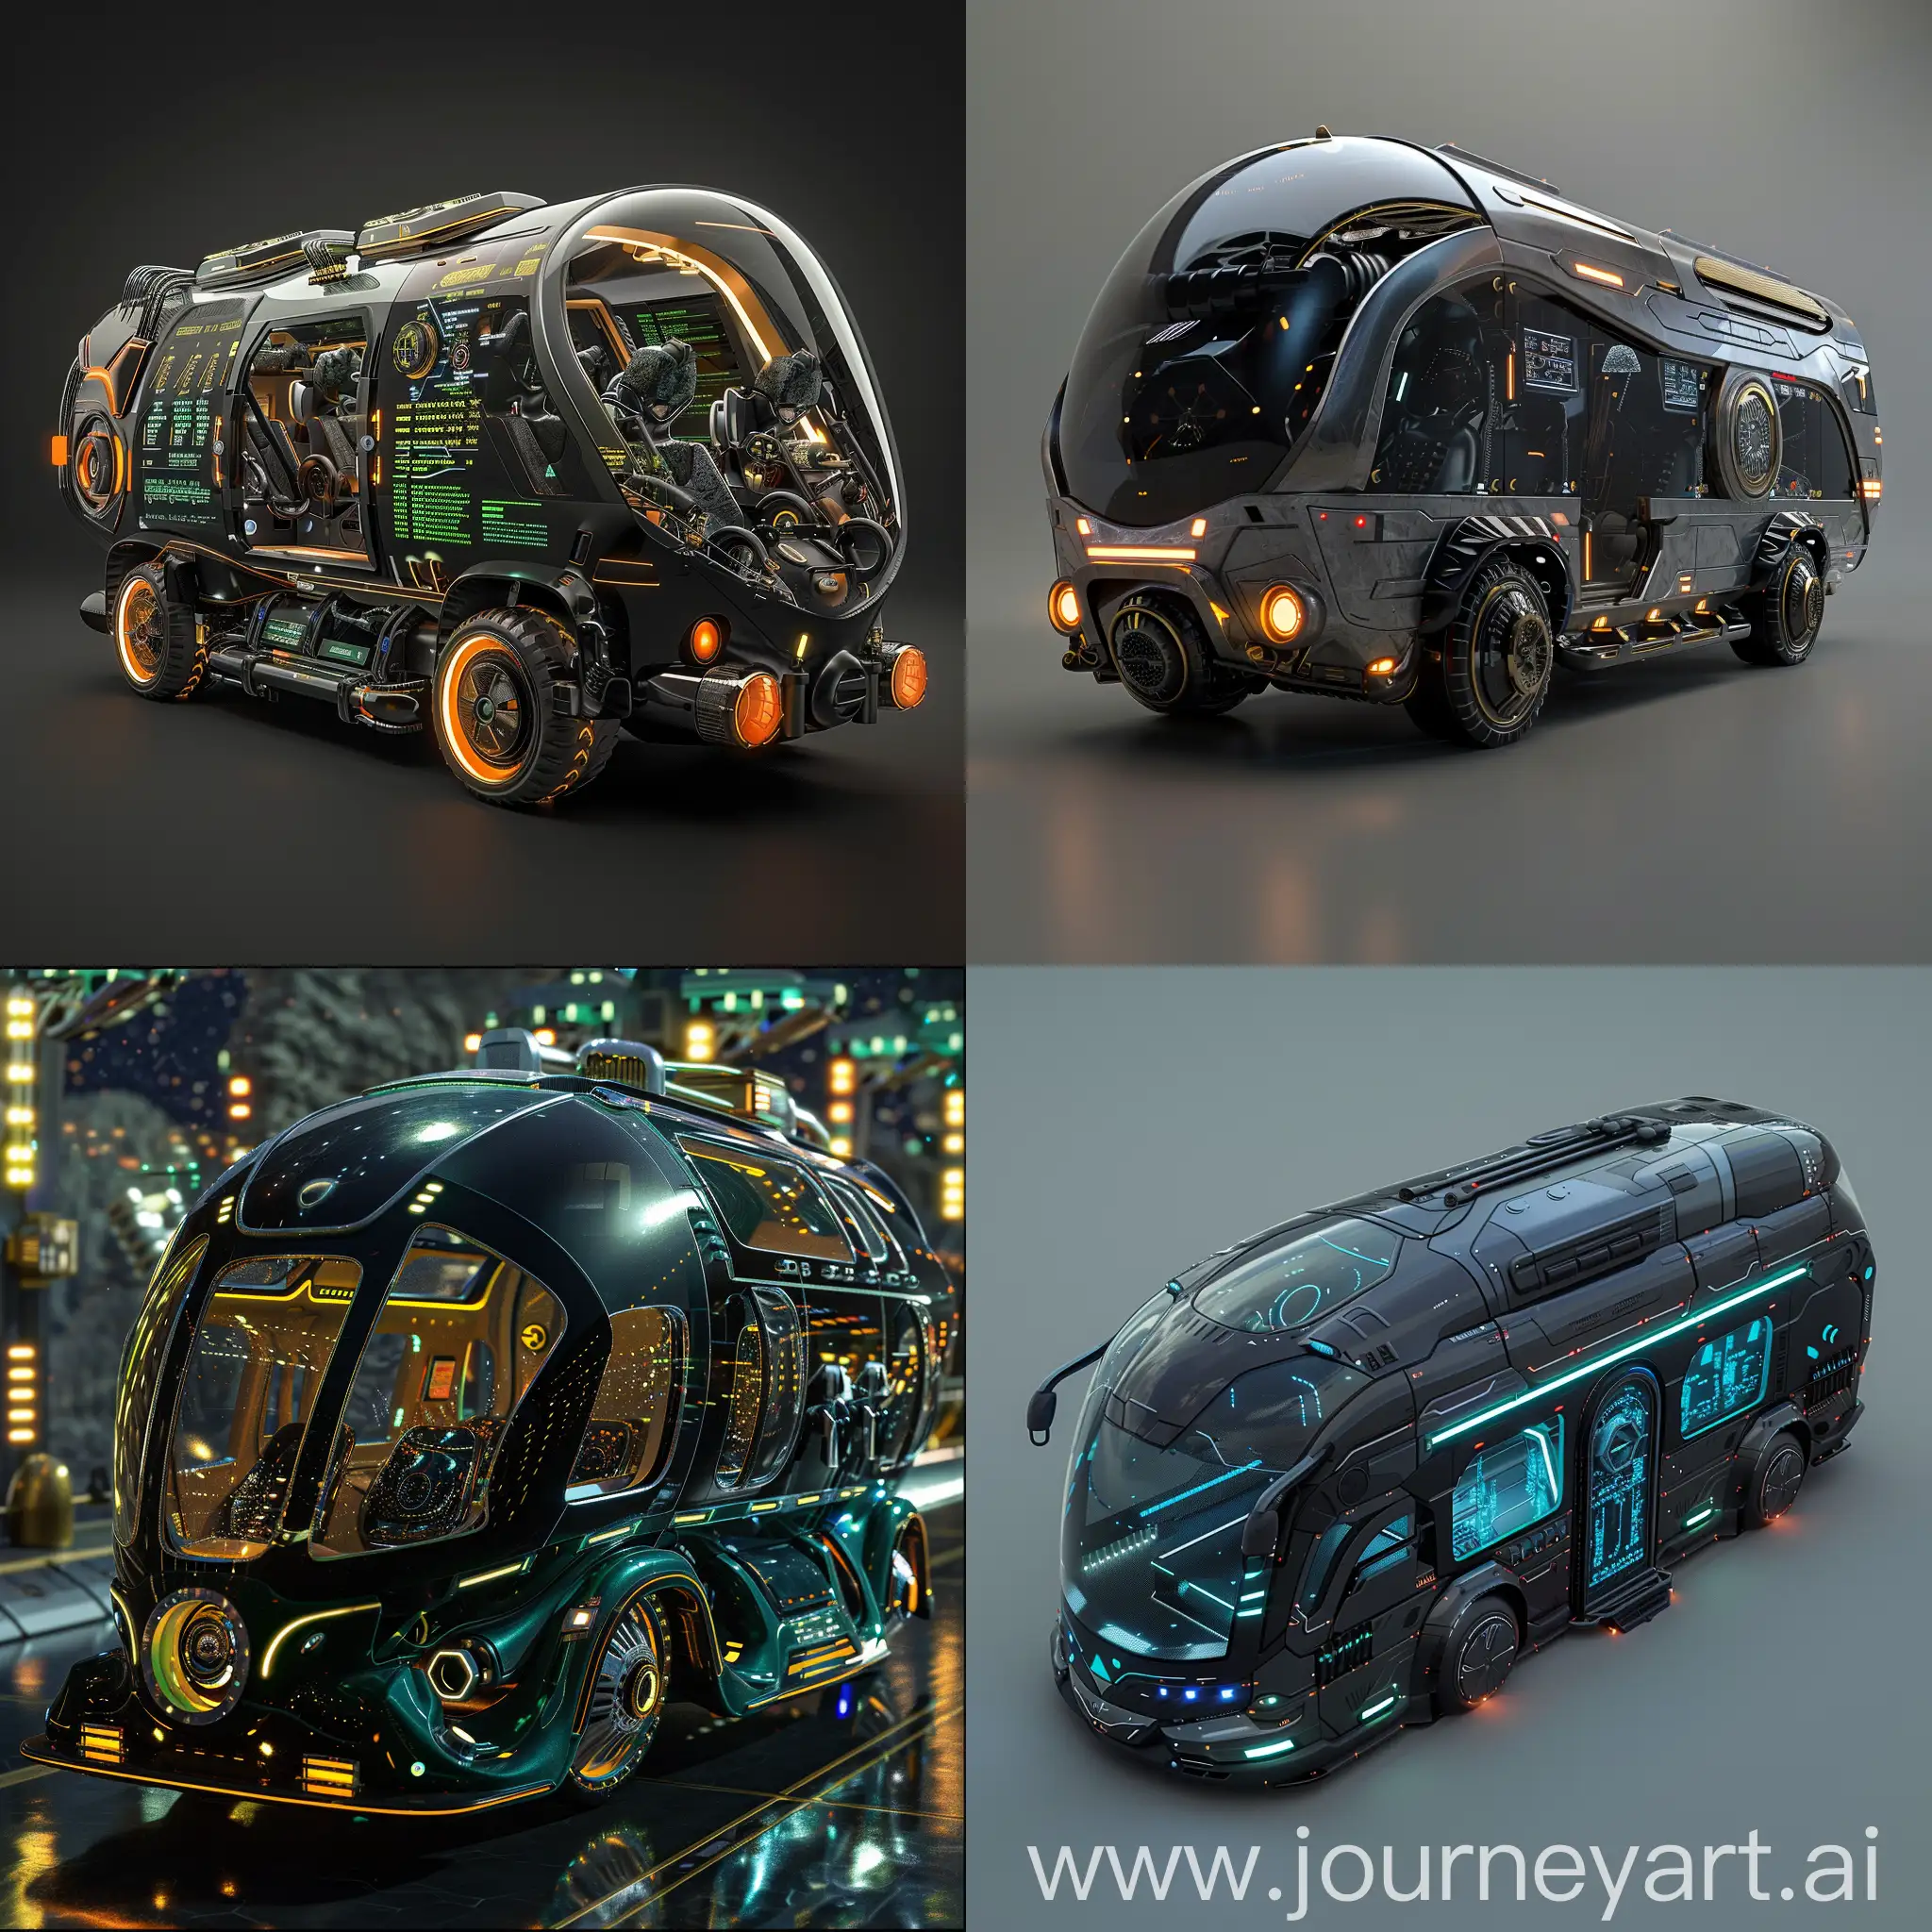 Sci-Fi microbus, Advanced Science and Technology, Fictional Science and Technology, Quantum Core Engine, Holographic Control Panel, Bio-Adaptive Seats, Neural-Linked Navigation, Molecular Fabrication Unit, Energy Shielding, AI Co-Pilot System, Atmospheric Purification System, Subspace Storage Compartments, Autonomous Repair Drones, Adaptive Camouflage Skin, Solar Sails, Gravitational Wheel Arrays, Teleportation Hatch, Time-Dilation Headlights, Magnetic Field Generators, Atmospheric Entry Shield, Quantum Signal Antenna, Holographic Display Shell, Self-Cleaning Nanobots, In Unreal Engine 5 Style --stylize 1000